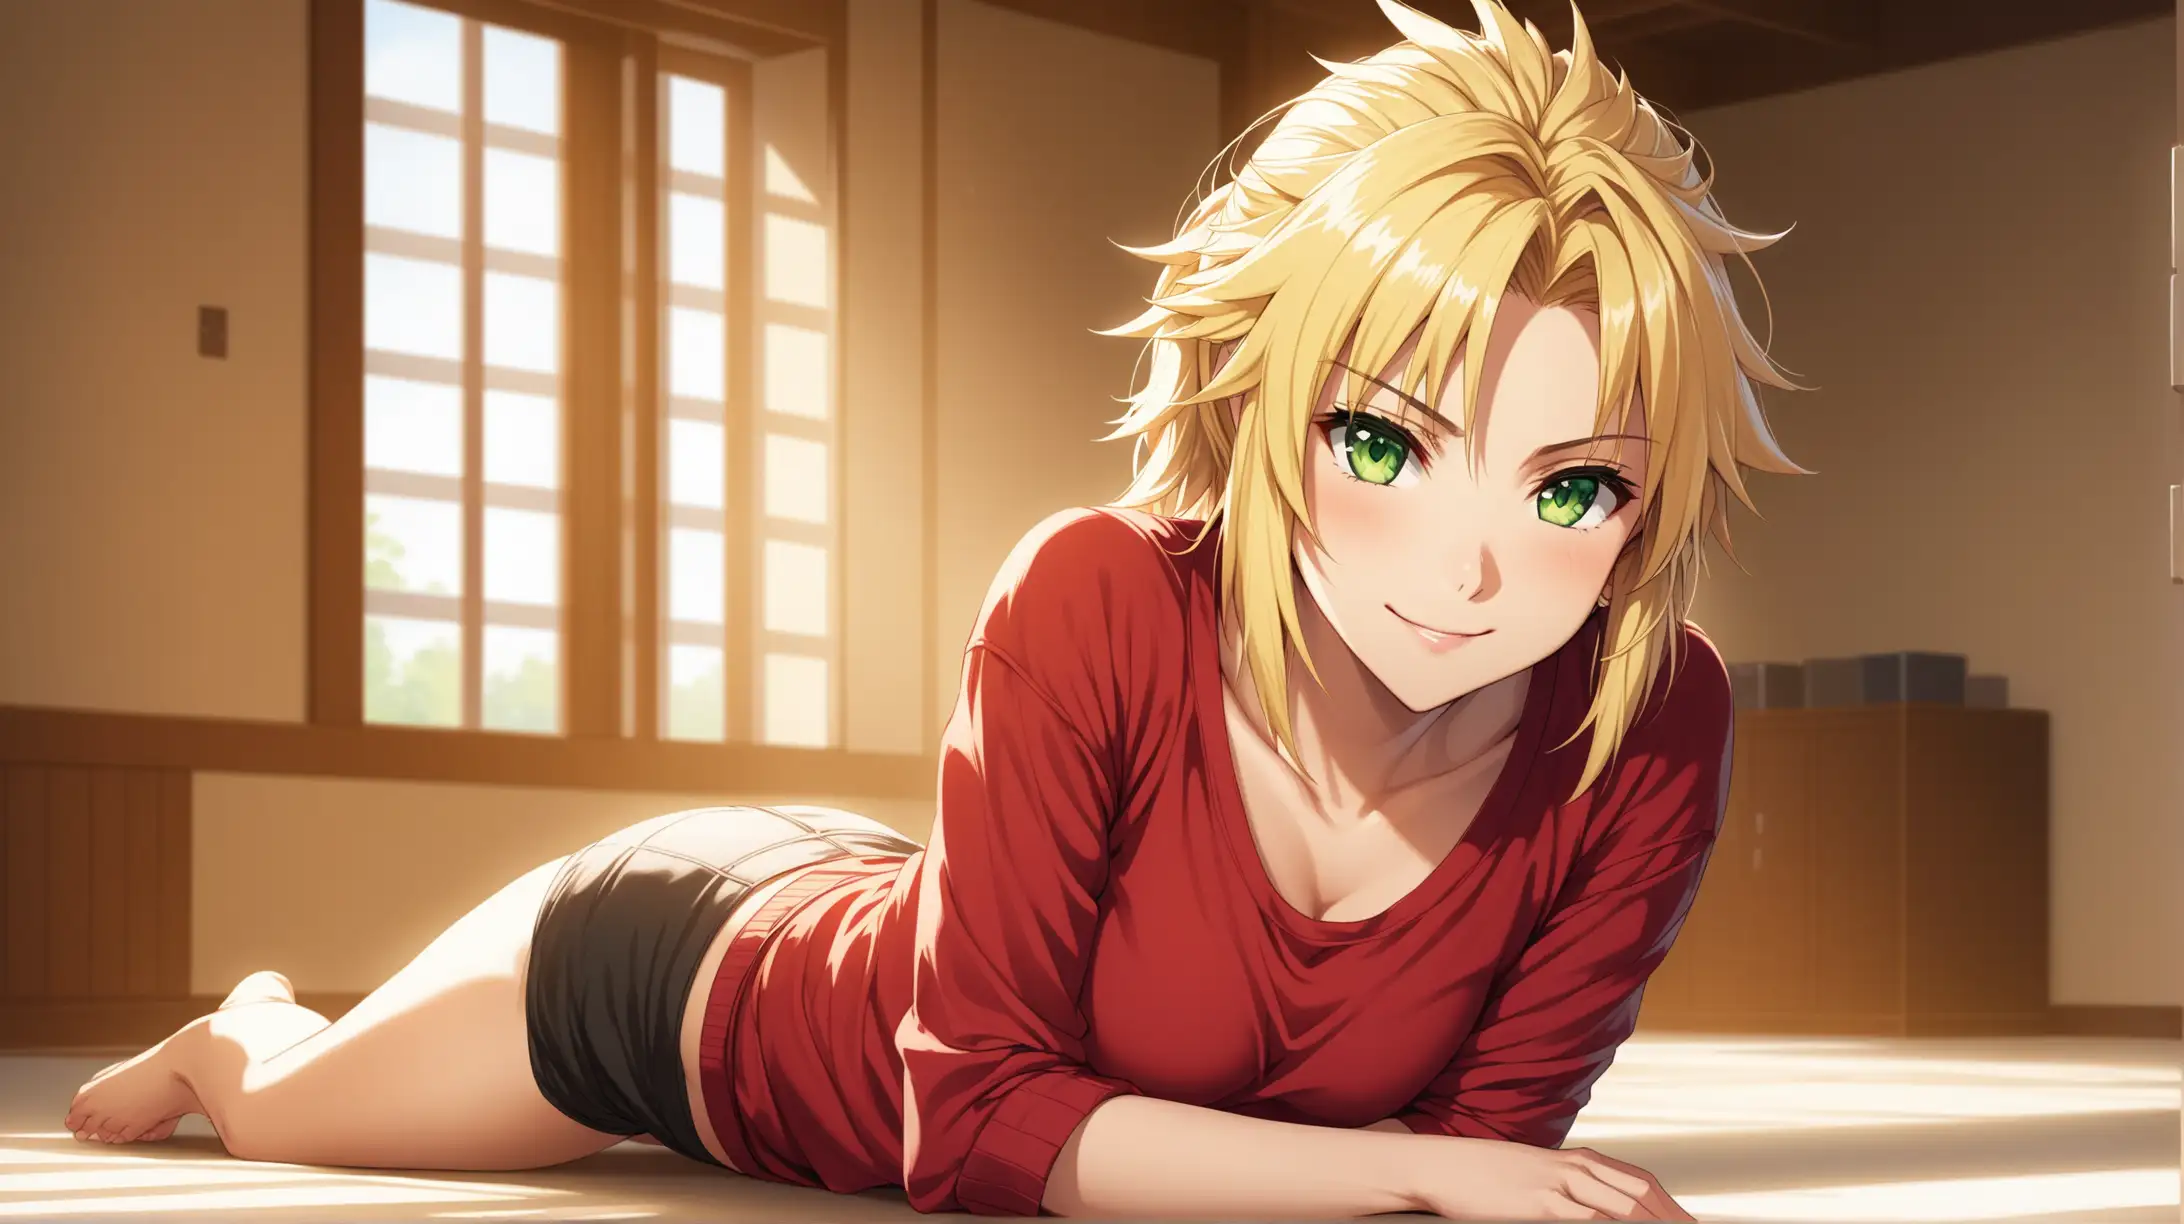 Seductive Mordred Smiling in Casual Attire Captivating Portrait with Natural Lighting